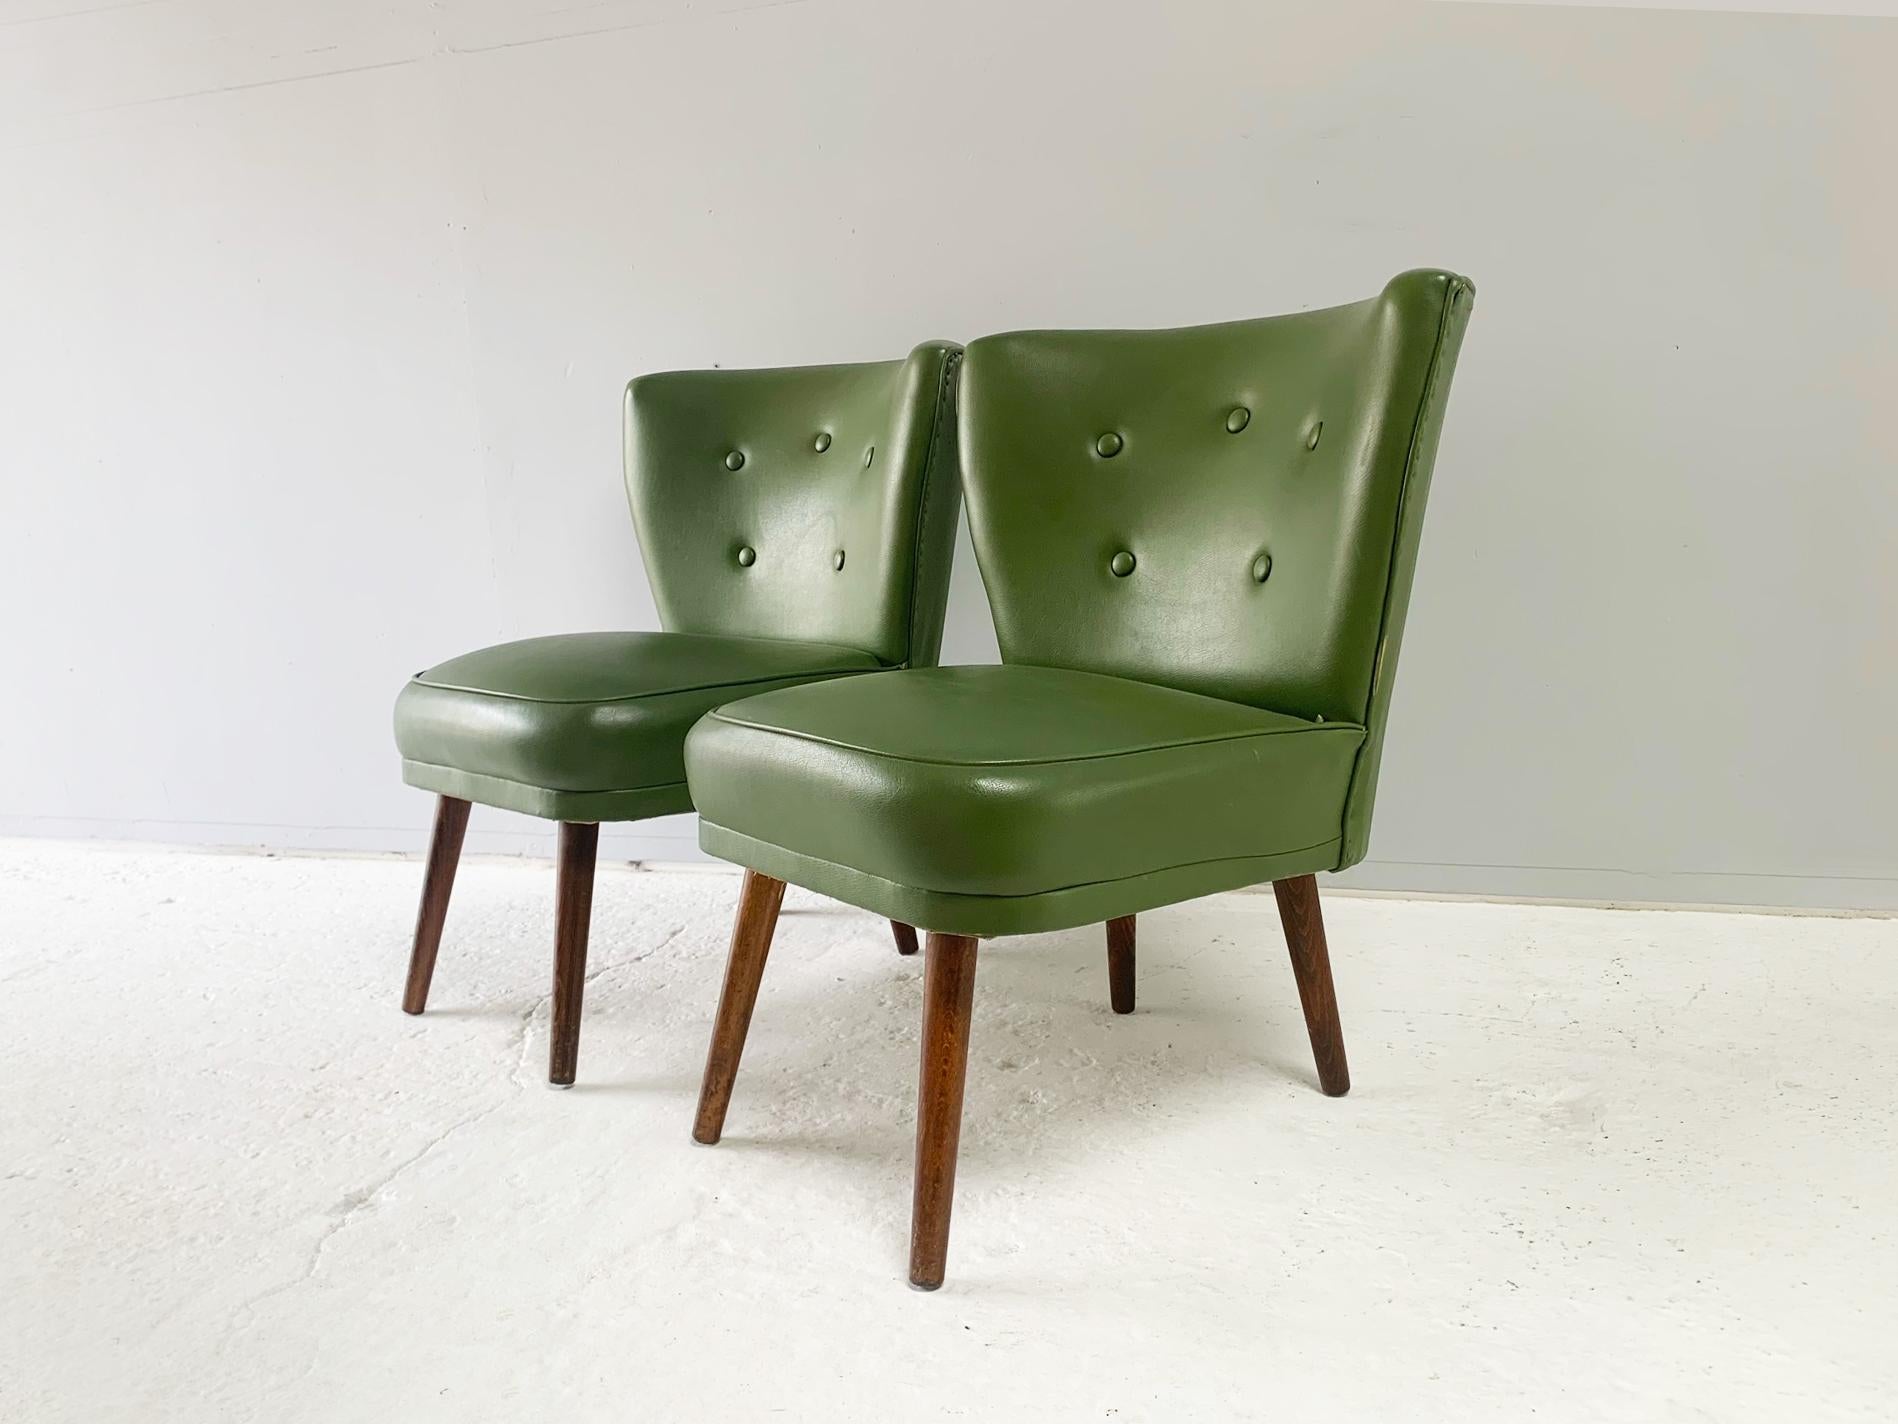 The price listed is for one chair. There are two chairs available.

Cocktail / occasional / bedroom chair, produced in Belgium in the late 1950’s. Upholstered in the original olive green leatherette (faux leather). Button detailing on back rest